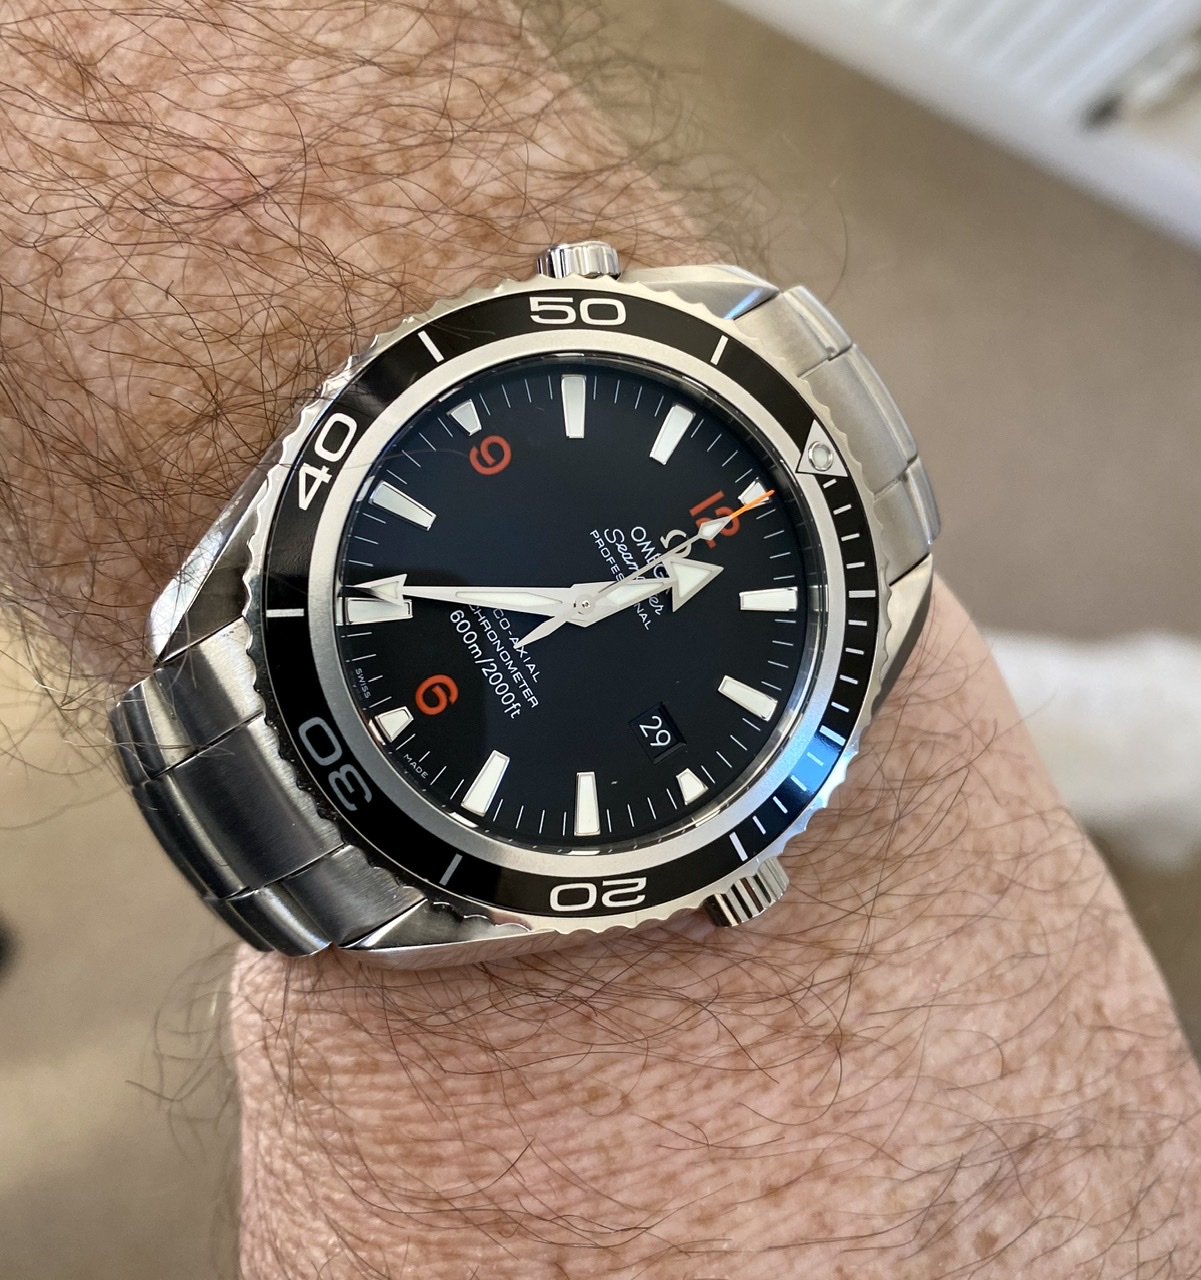 Wrist Check - 2019 - Page 120 - Watches - PistonHeads